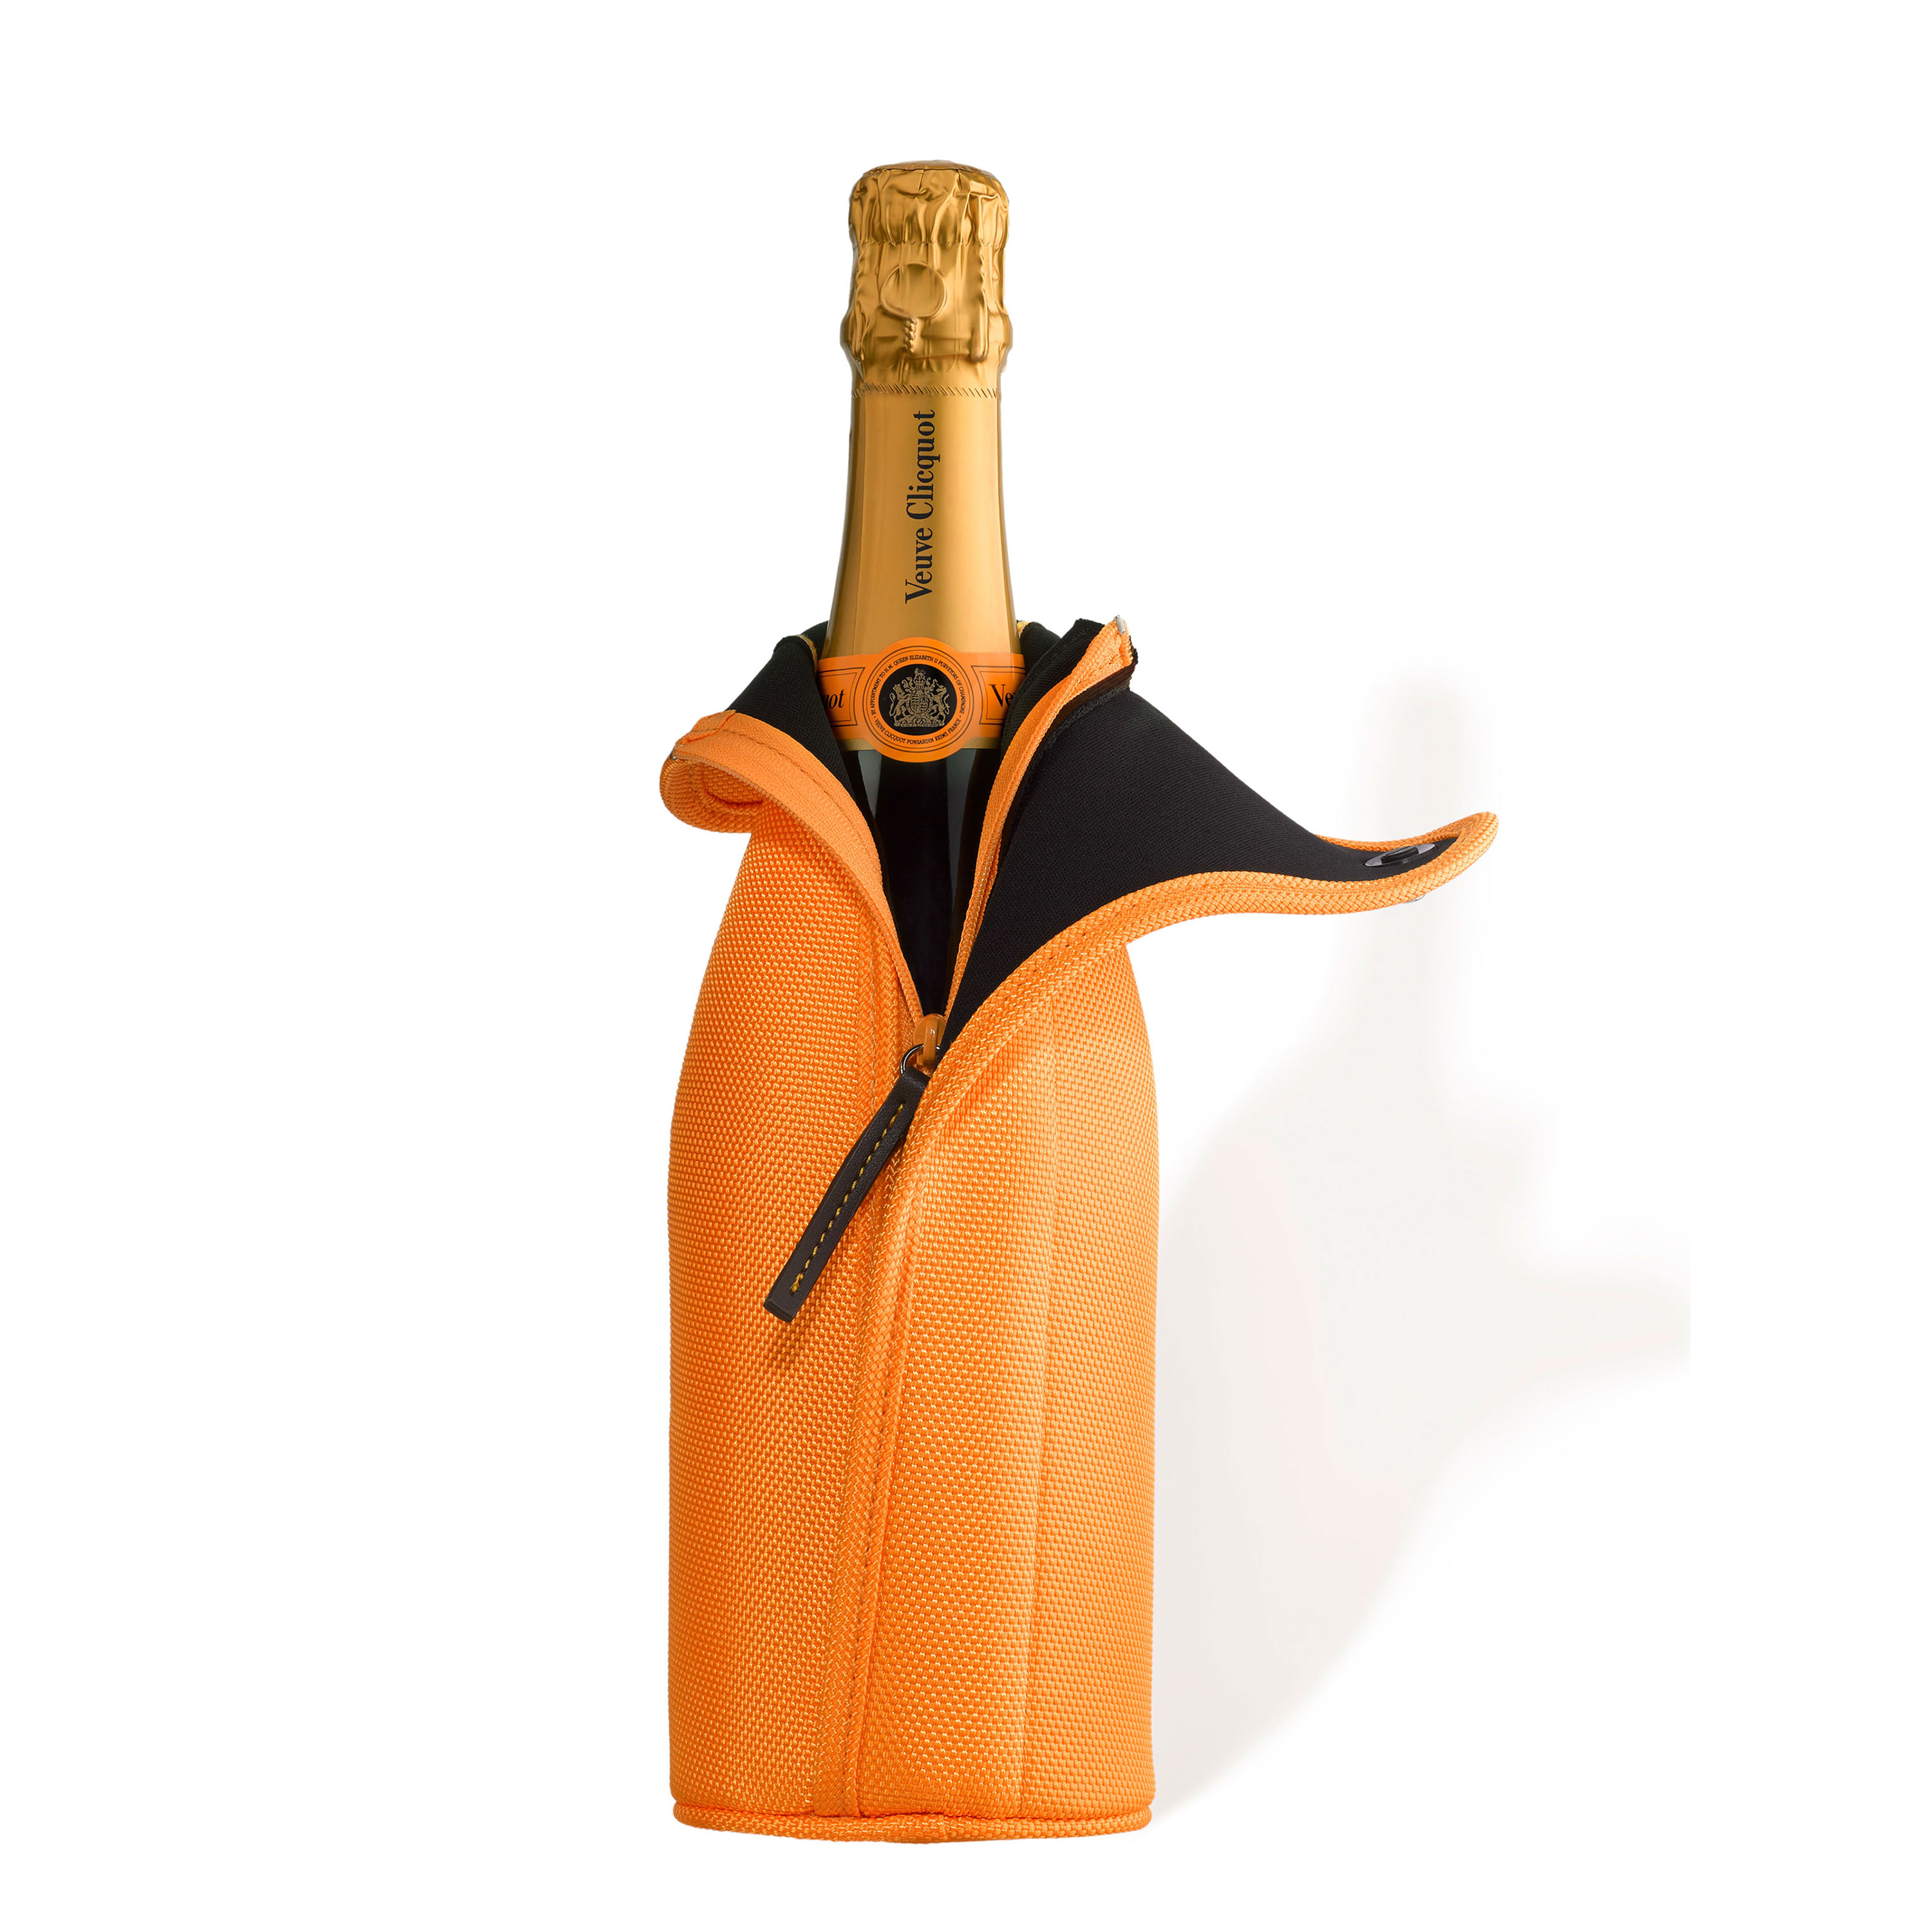 Veuve Clicquot Ponsardin with Ice Jacket Champagne - 750ml